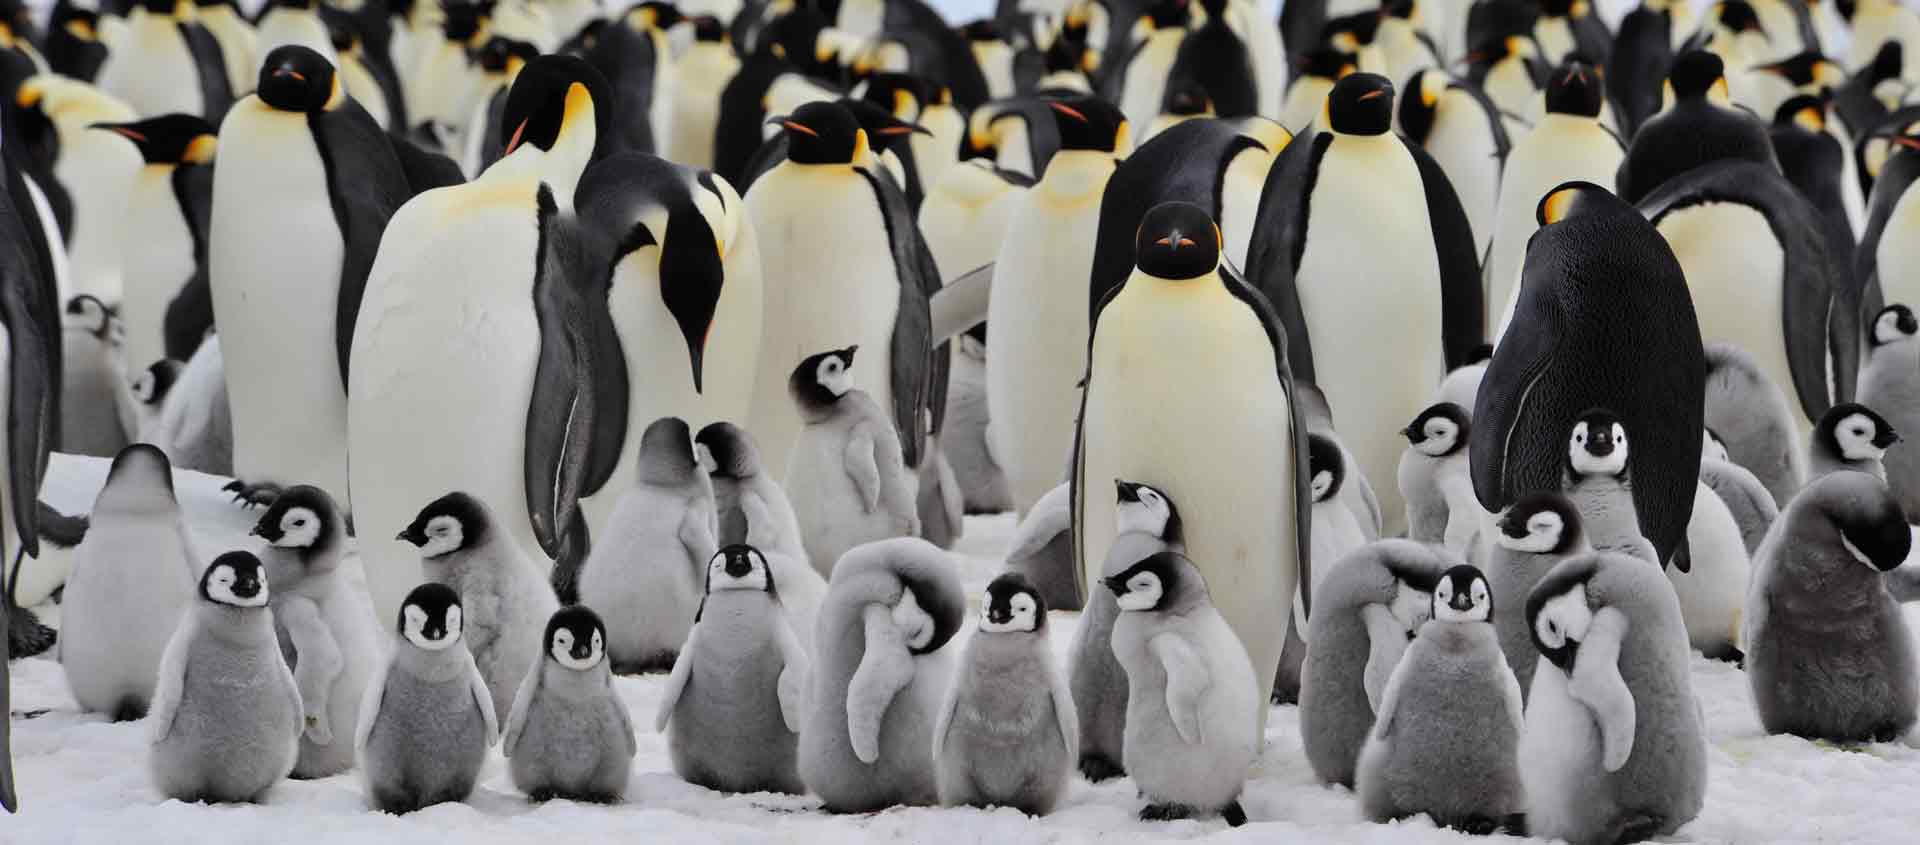 Emperor Penguin Cruise south of the Antarctic Circle image of Emperor Penguin Colony